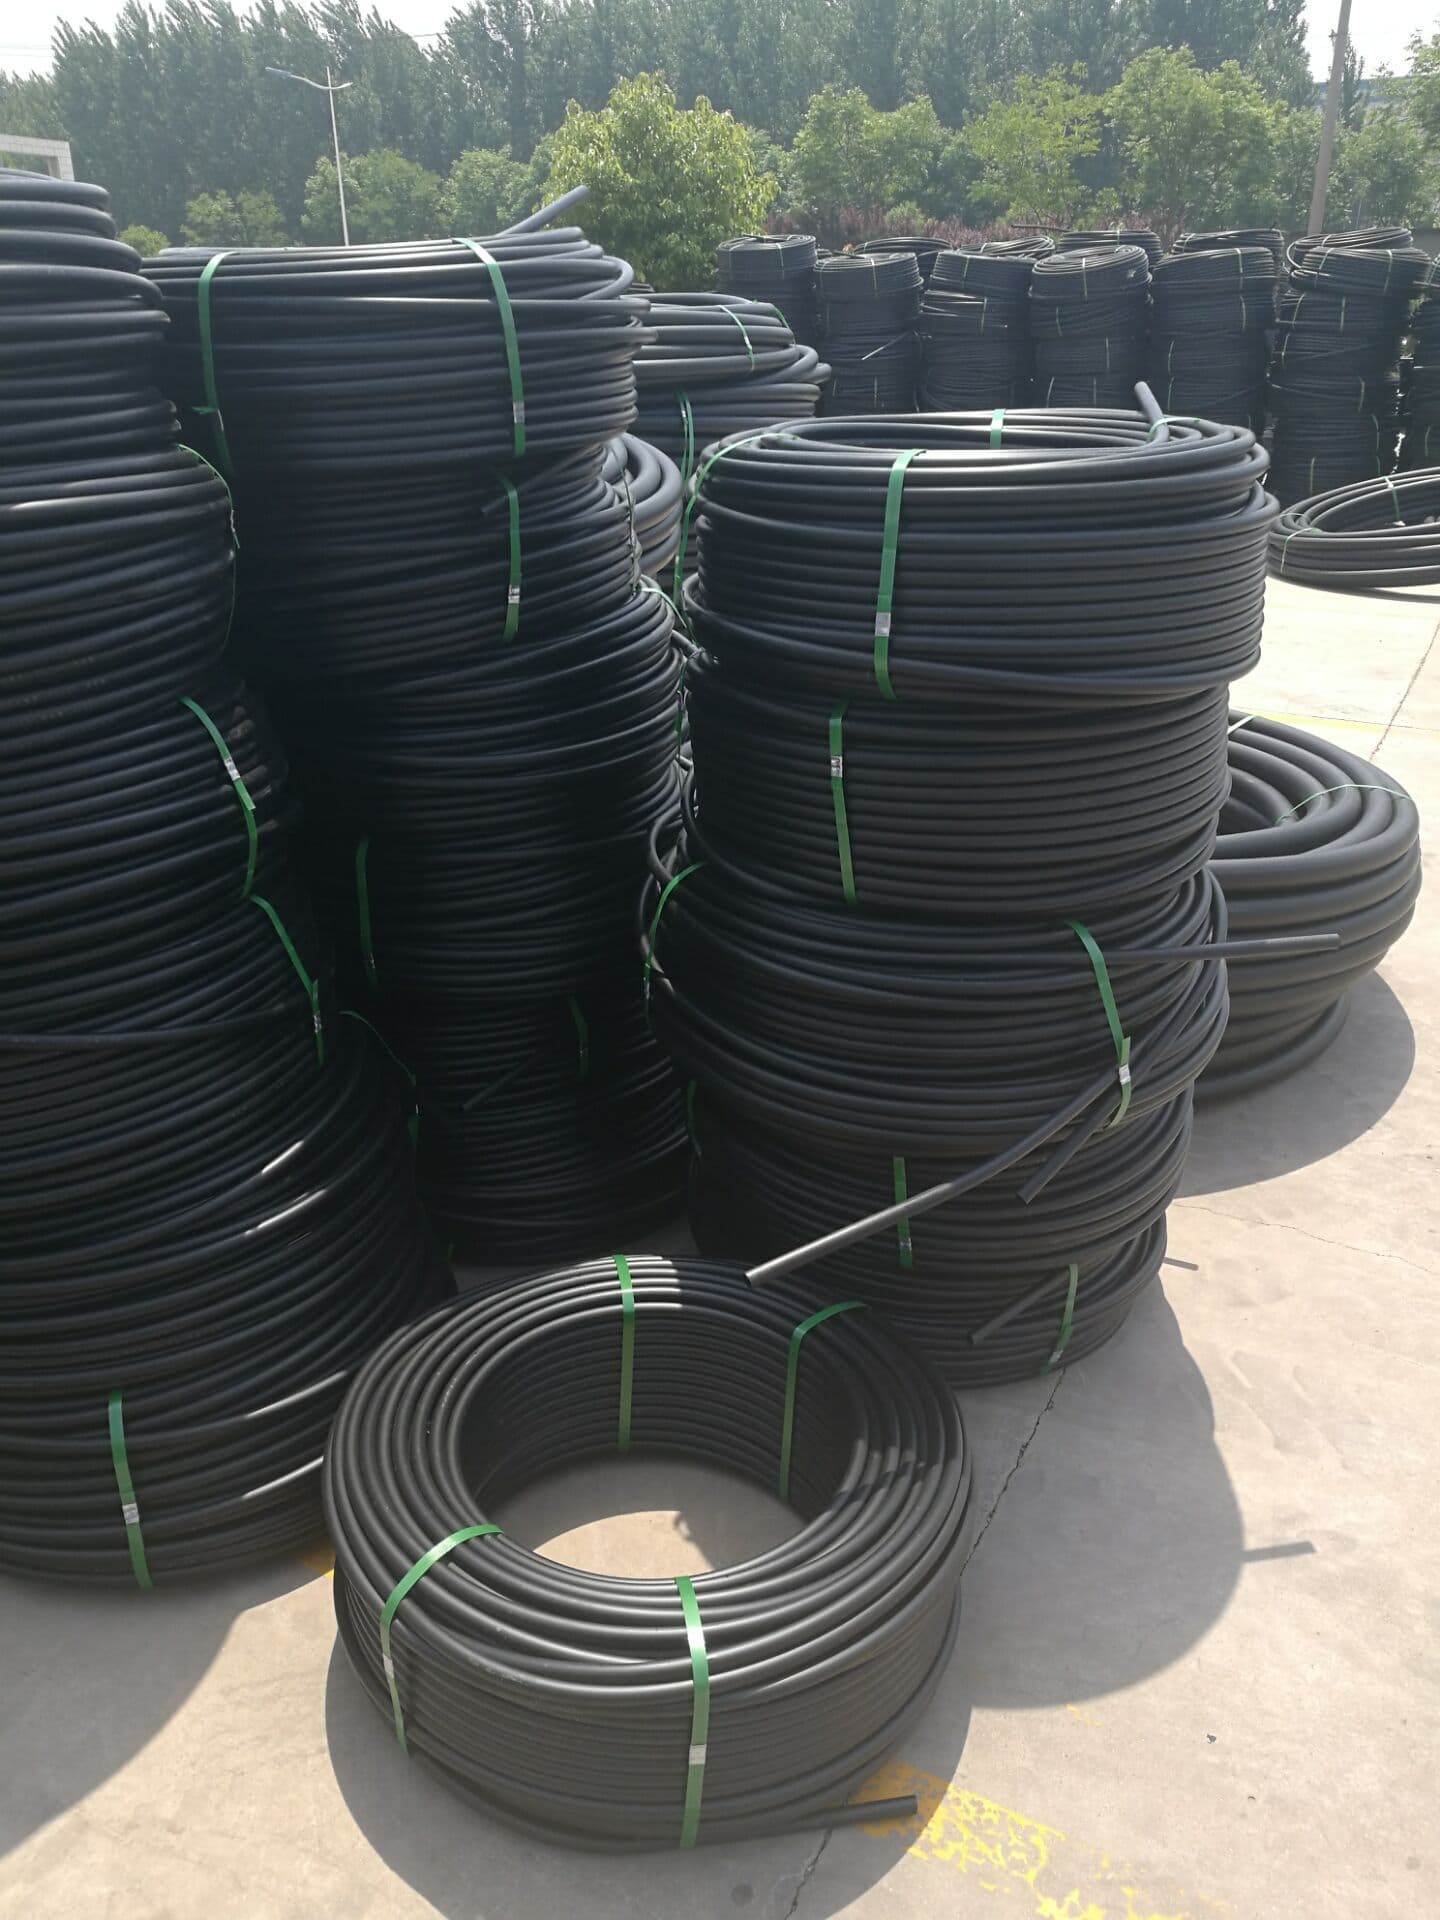 PVC Drip Pipe for Farms and Orchard Irrigation